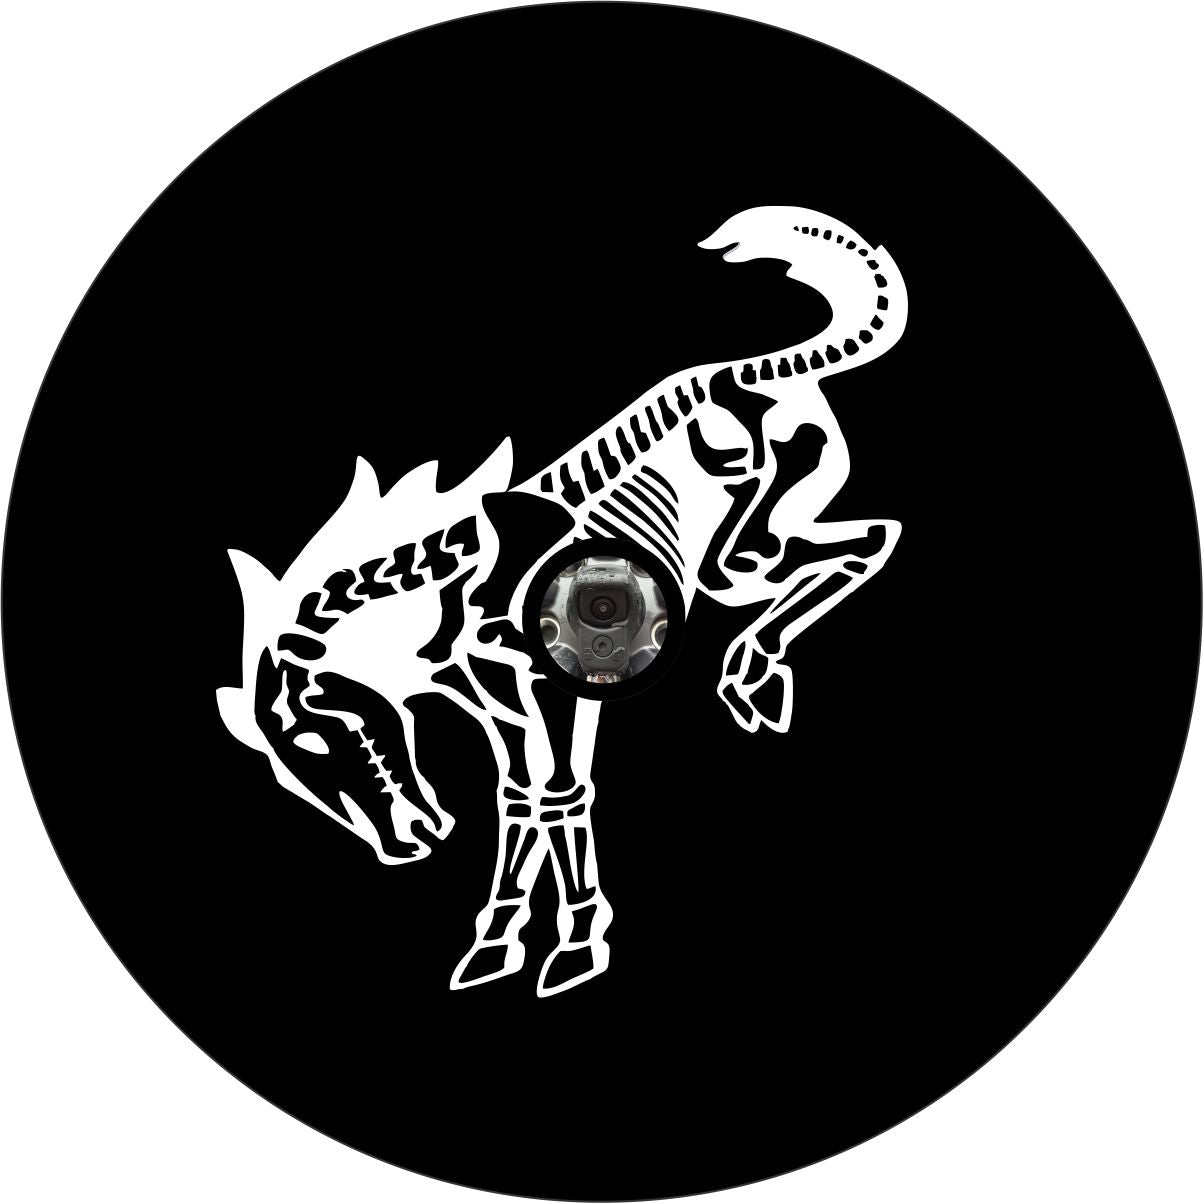 Mock up of a black vinyl spare tire cover with a Bronco horse skeleton design with a back up camera hole.